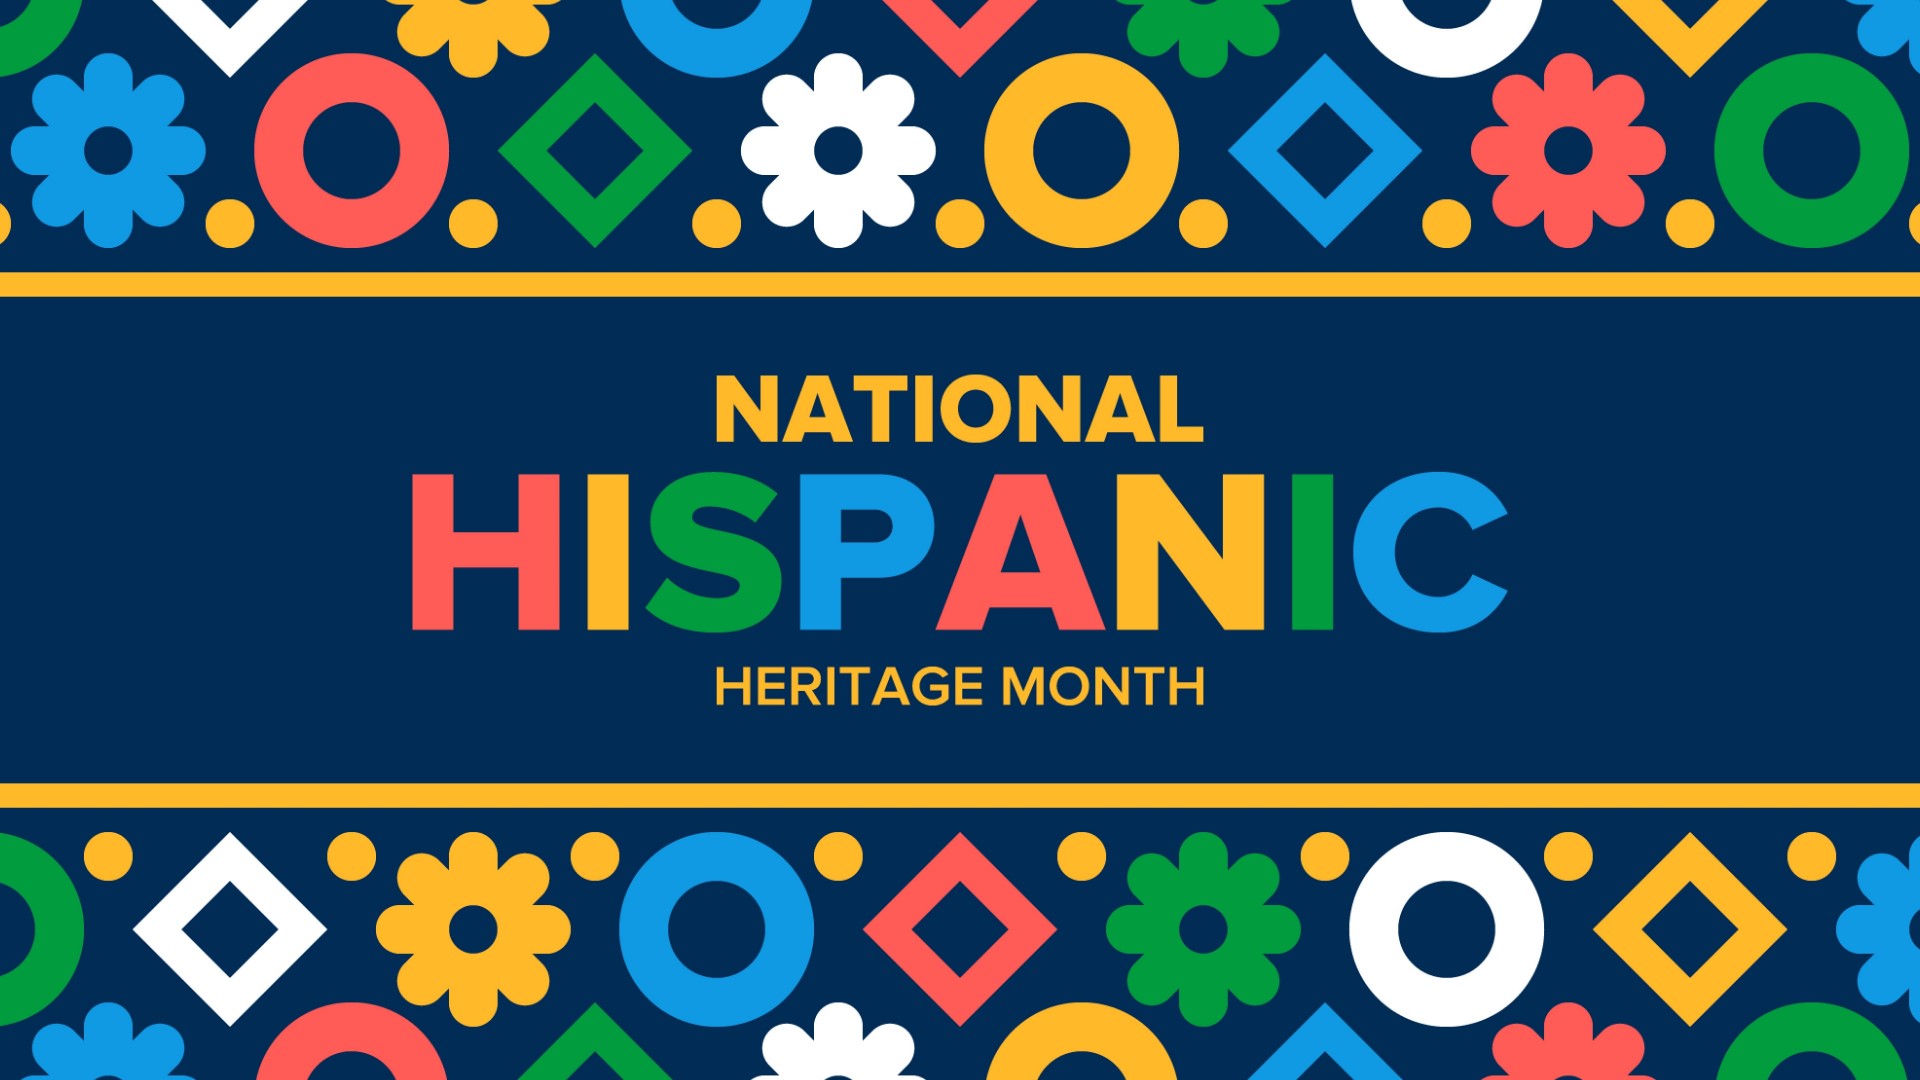 To celebrate Hispanic Heritage Month, local cities and institutions are hosting events to highlight the Hispanic culture present in the community.